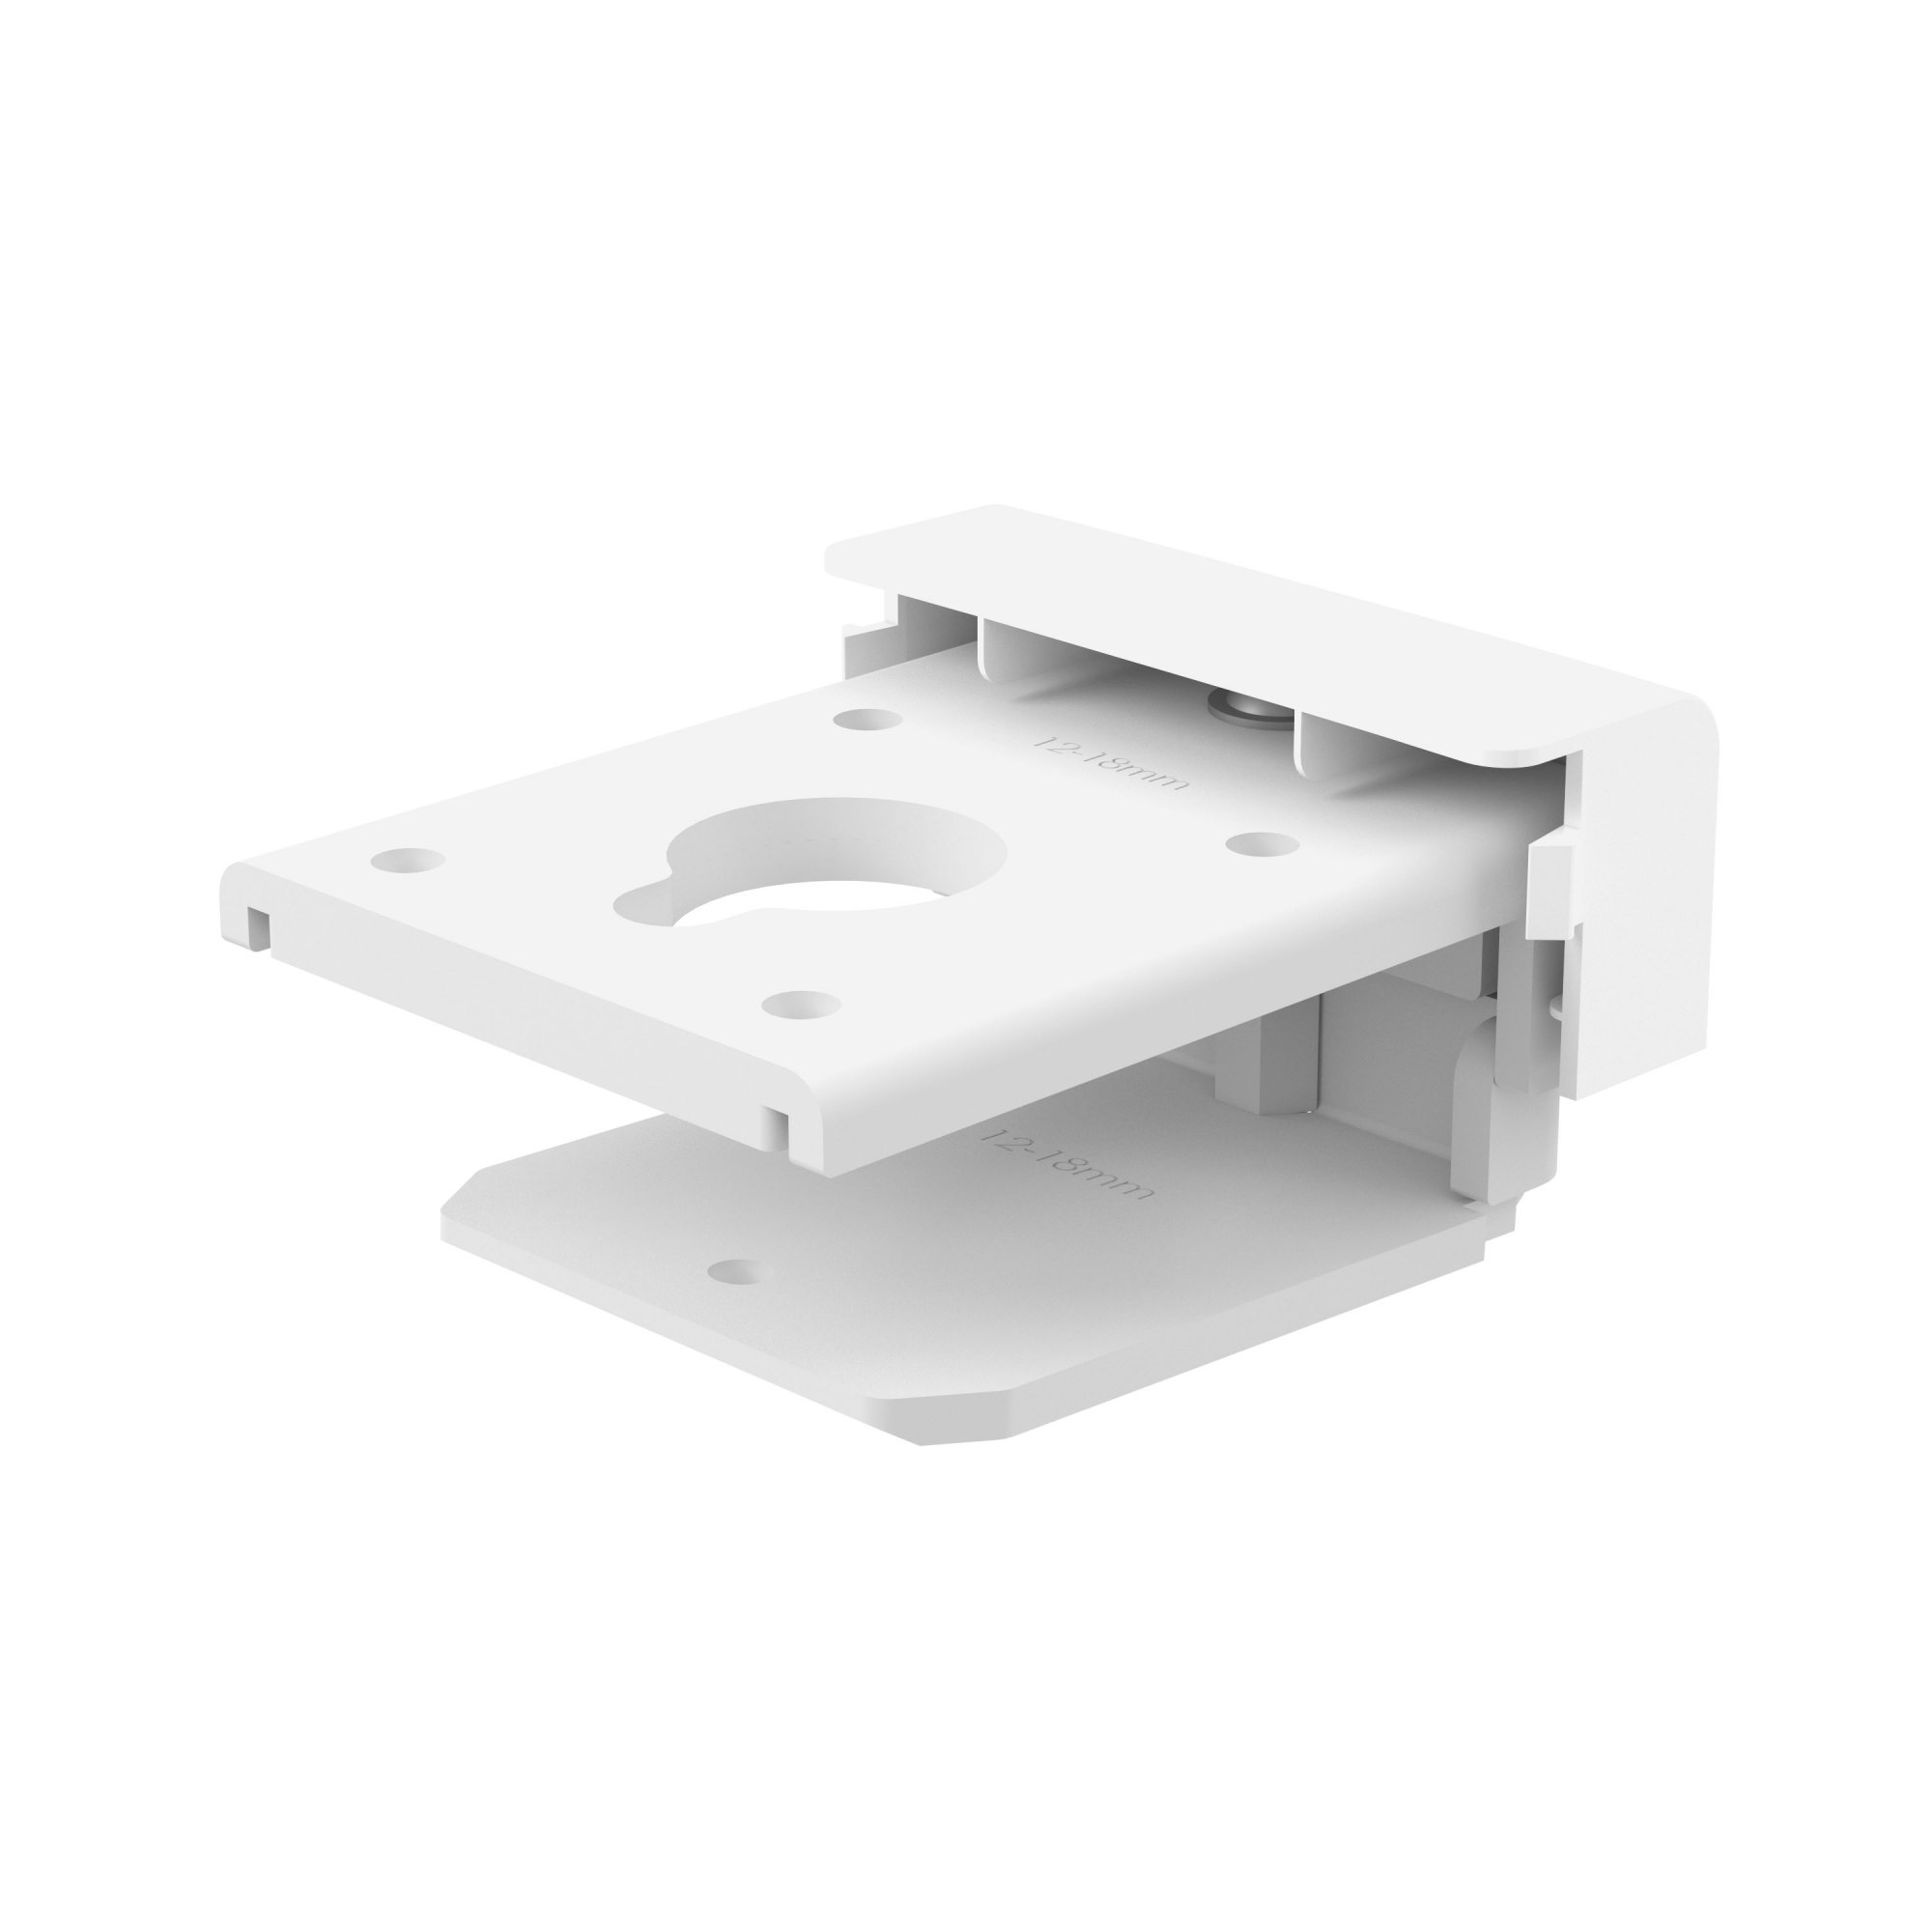 Ergotron 98-477-216 Low-Profile Top-Mount C-Clamp for 12-18 mm surface (white)